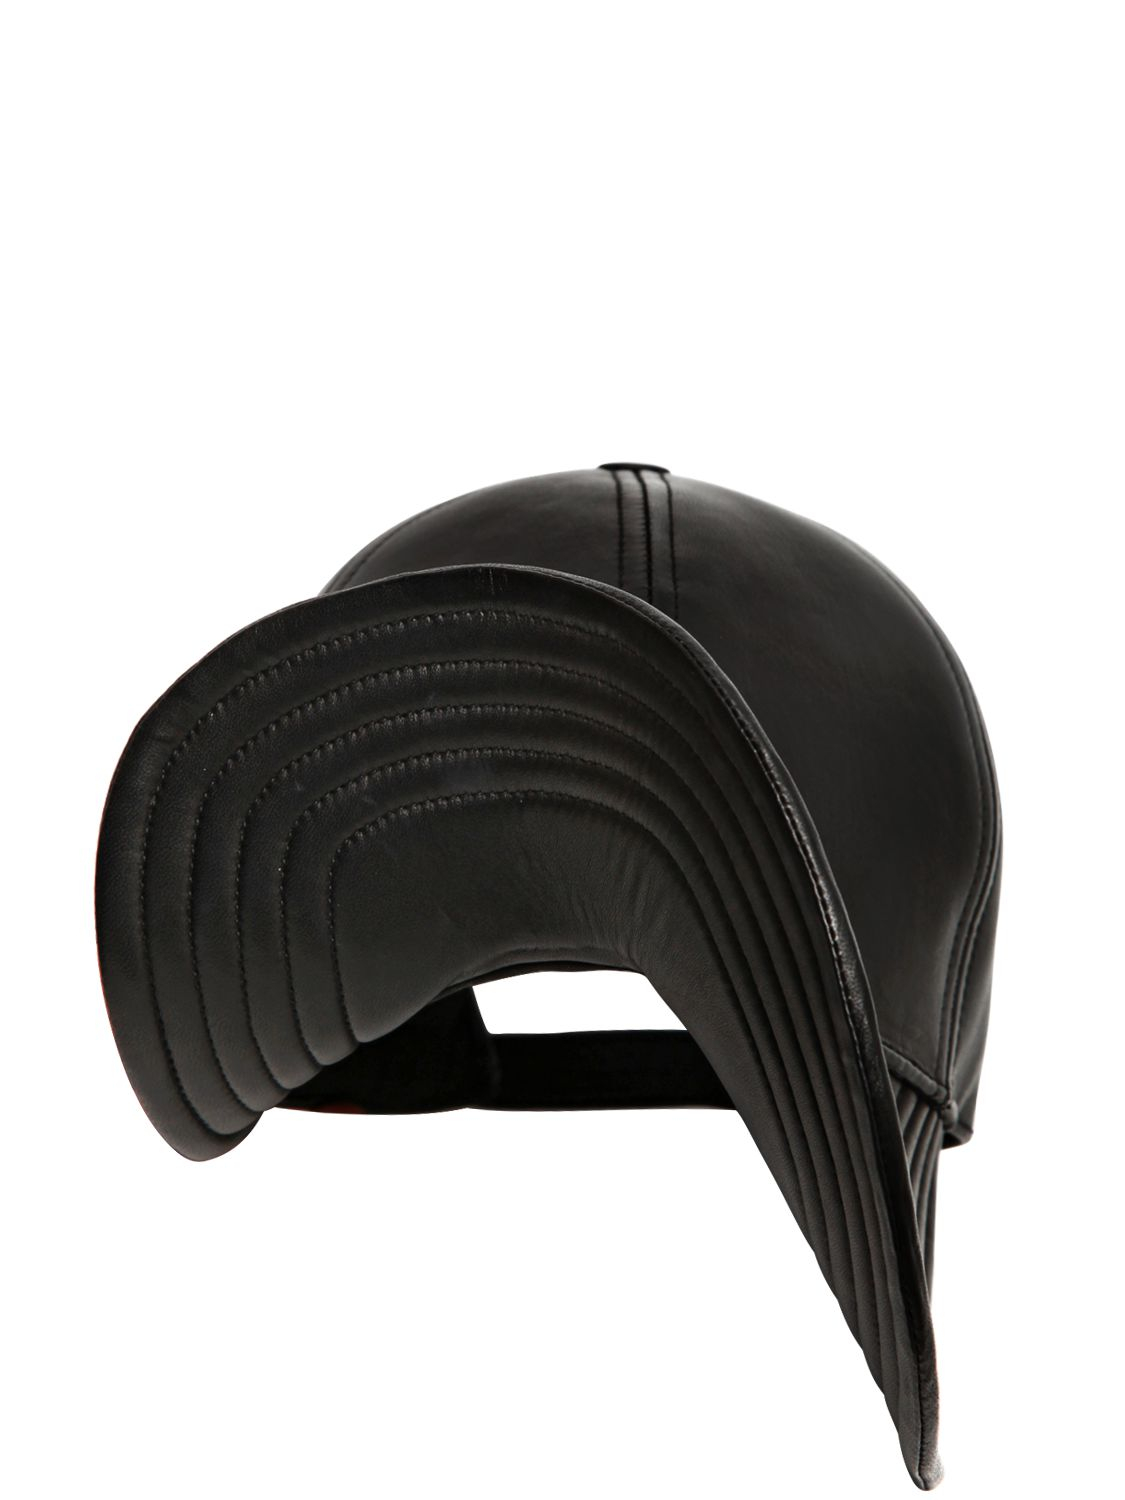 KTZ Leather Crooked Baseball Cap in Black for Men - Lyst